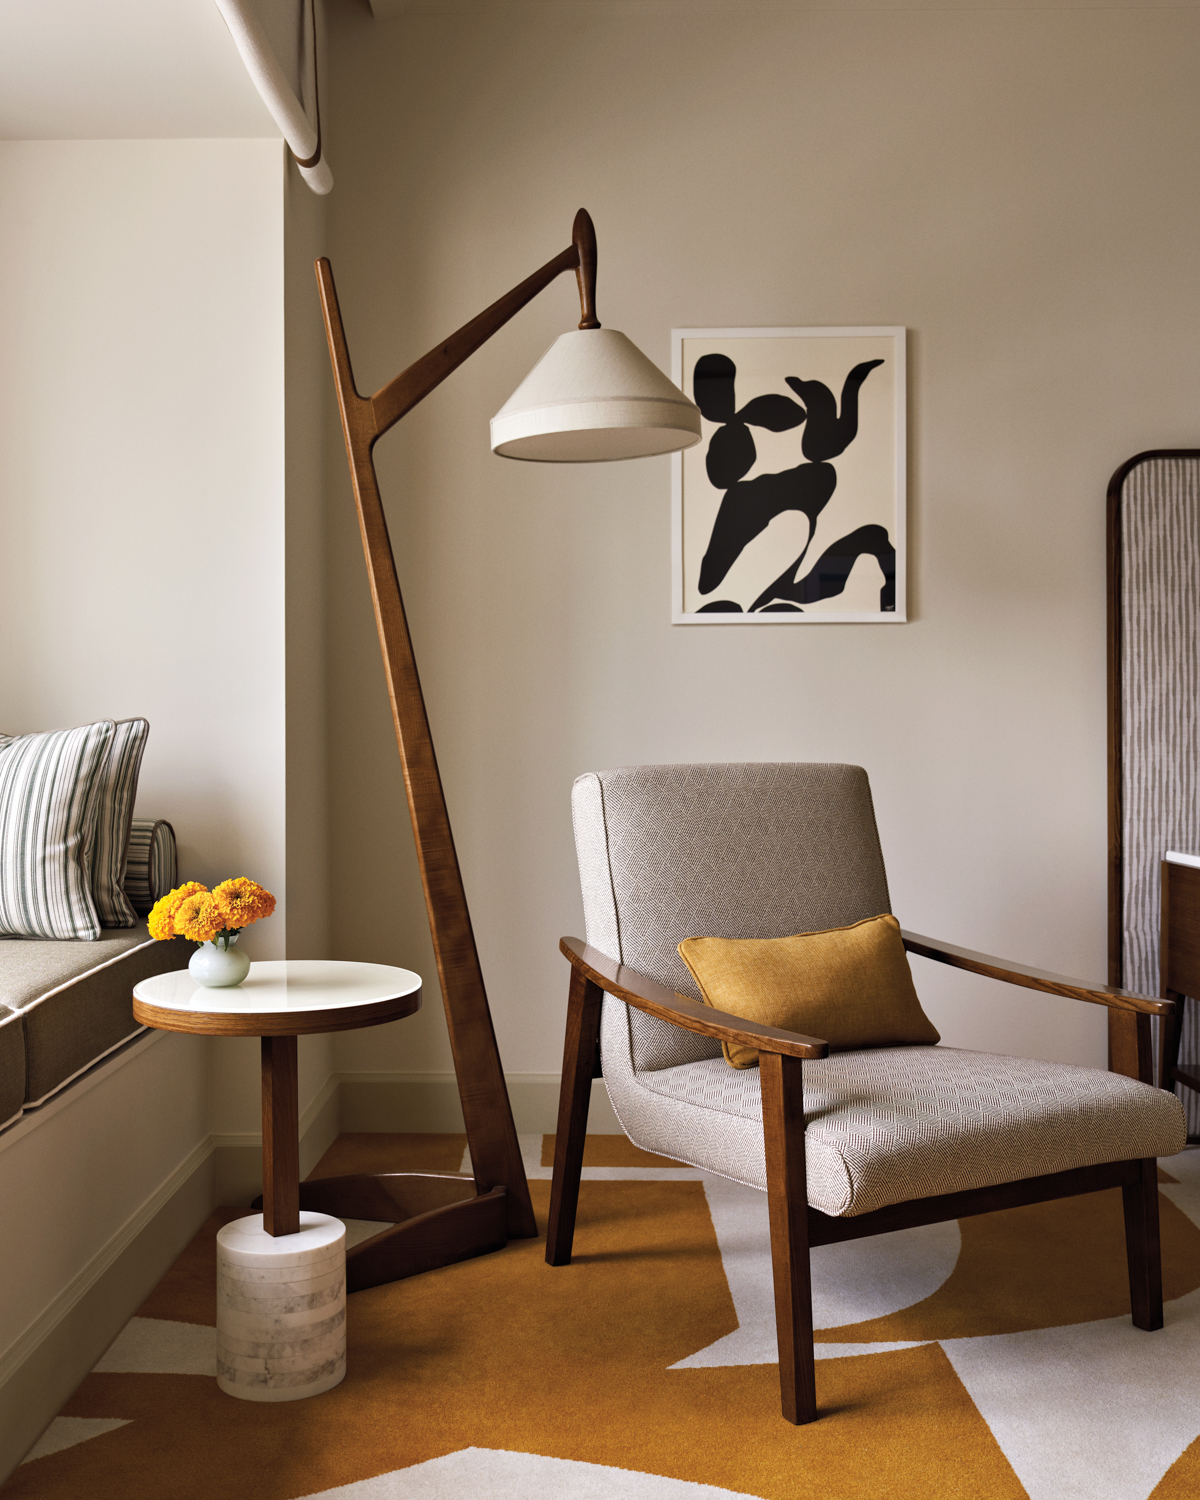 Midcentury-style armchair, floor lamp and side table sit atop yellow-and-white carpet